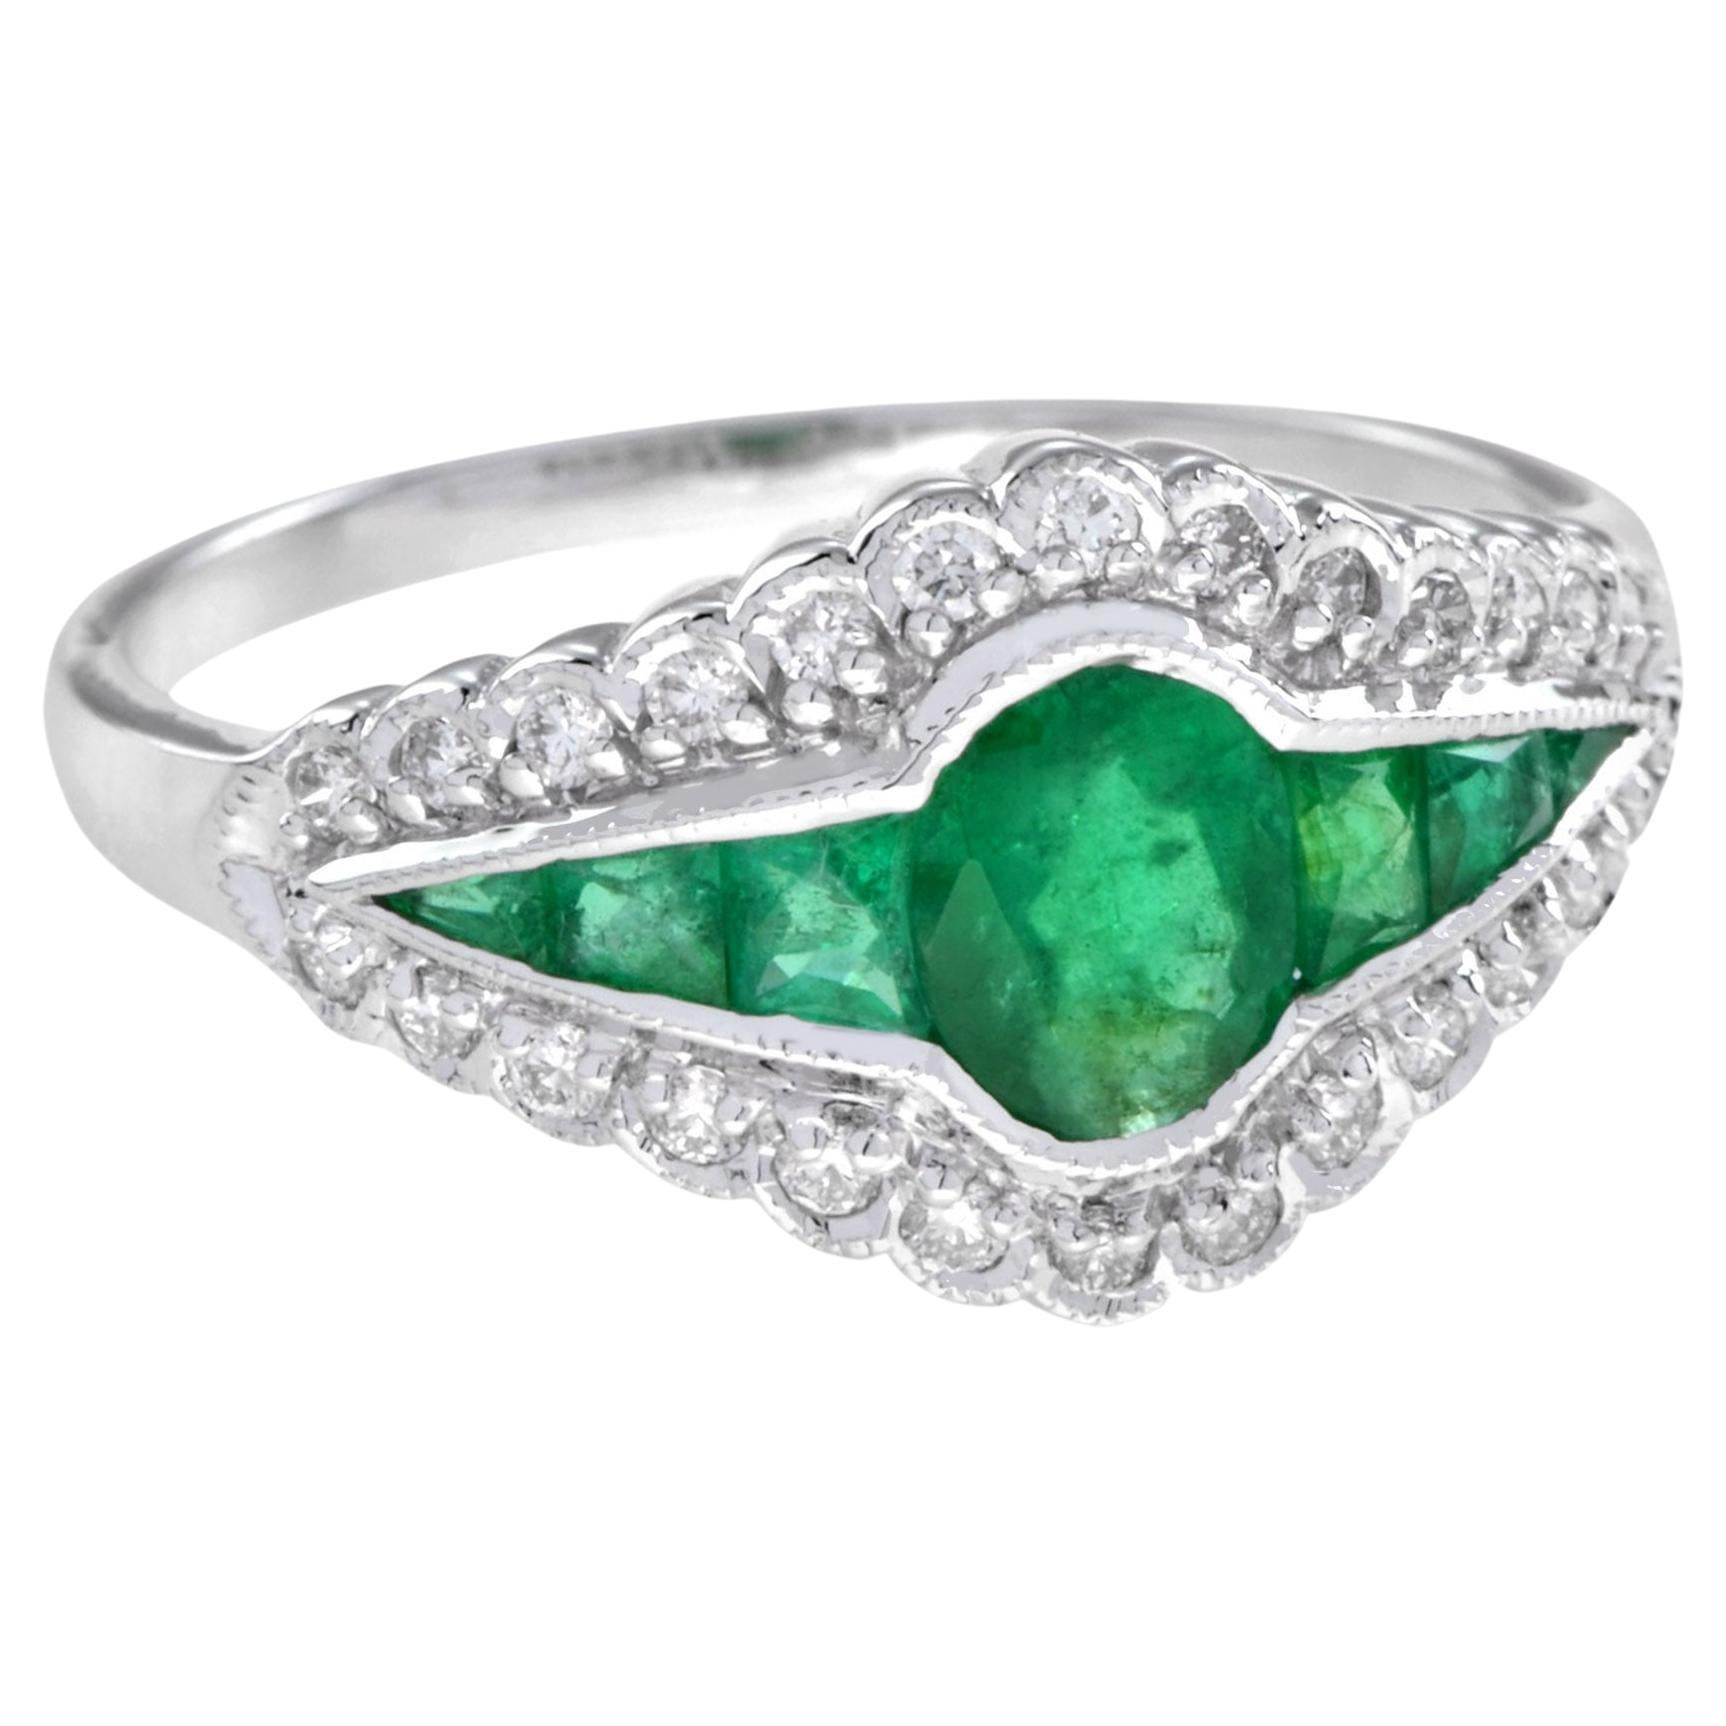 For Sale:  Catherine Lace Natural Emerald and Diamond Art Deco Style Halo Ring in 18K Gold